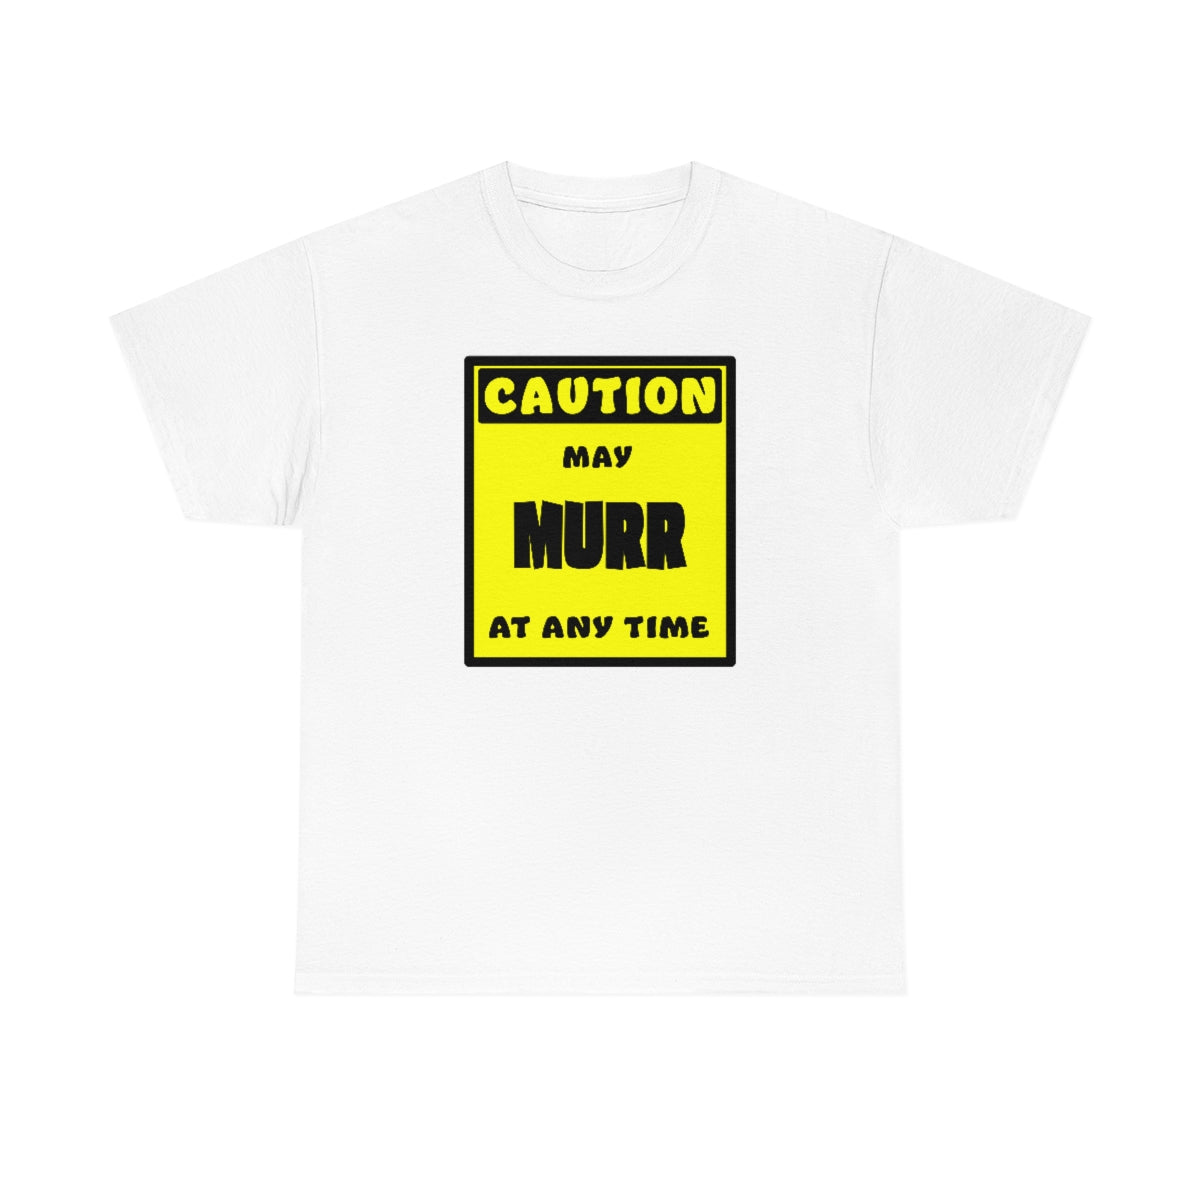 CAUTION! May MURR at any time! - T-Shirt T-Shirt AFLT-Whootorca White S 